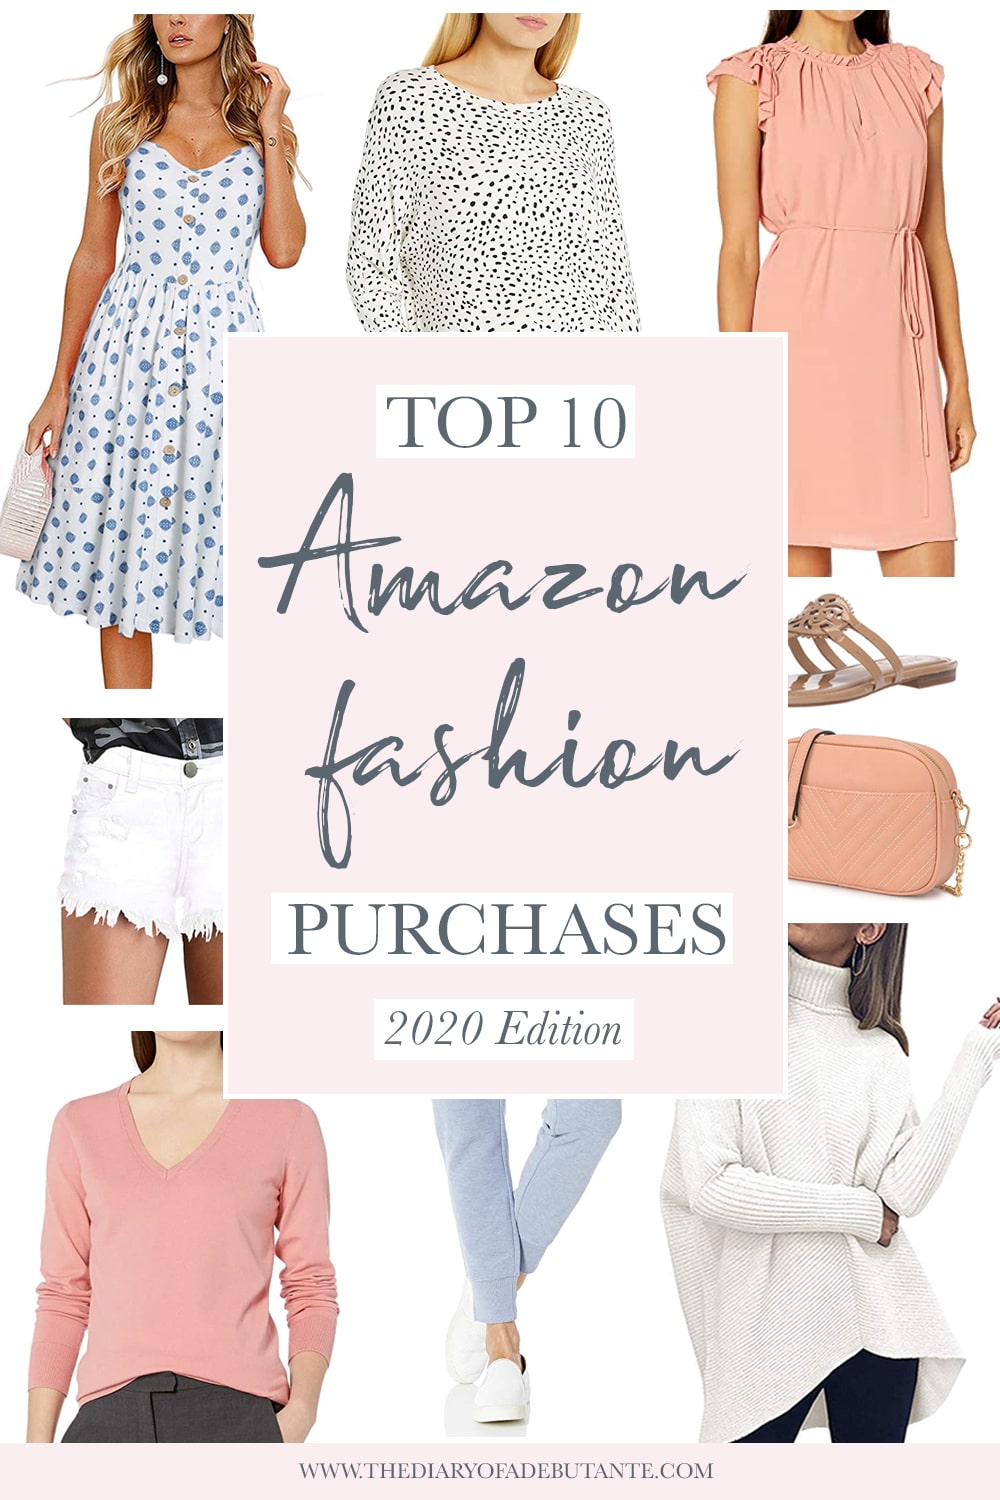 Blogger Stephanie Ziajka rounds up her top Amazon Fashion finds under 50 from 2020 on Diary of a Debutante